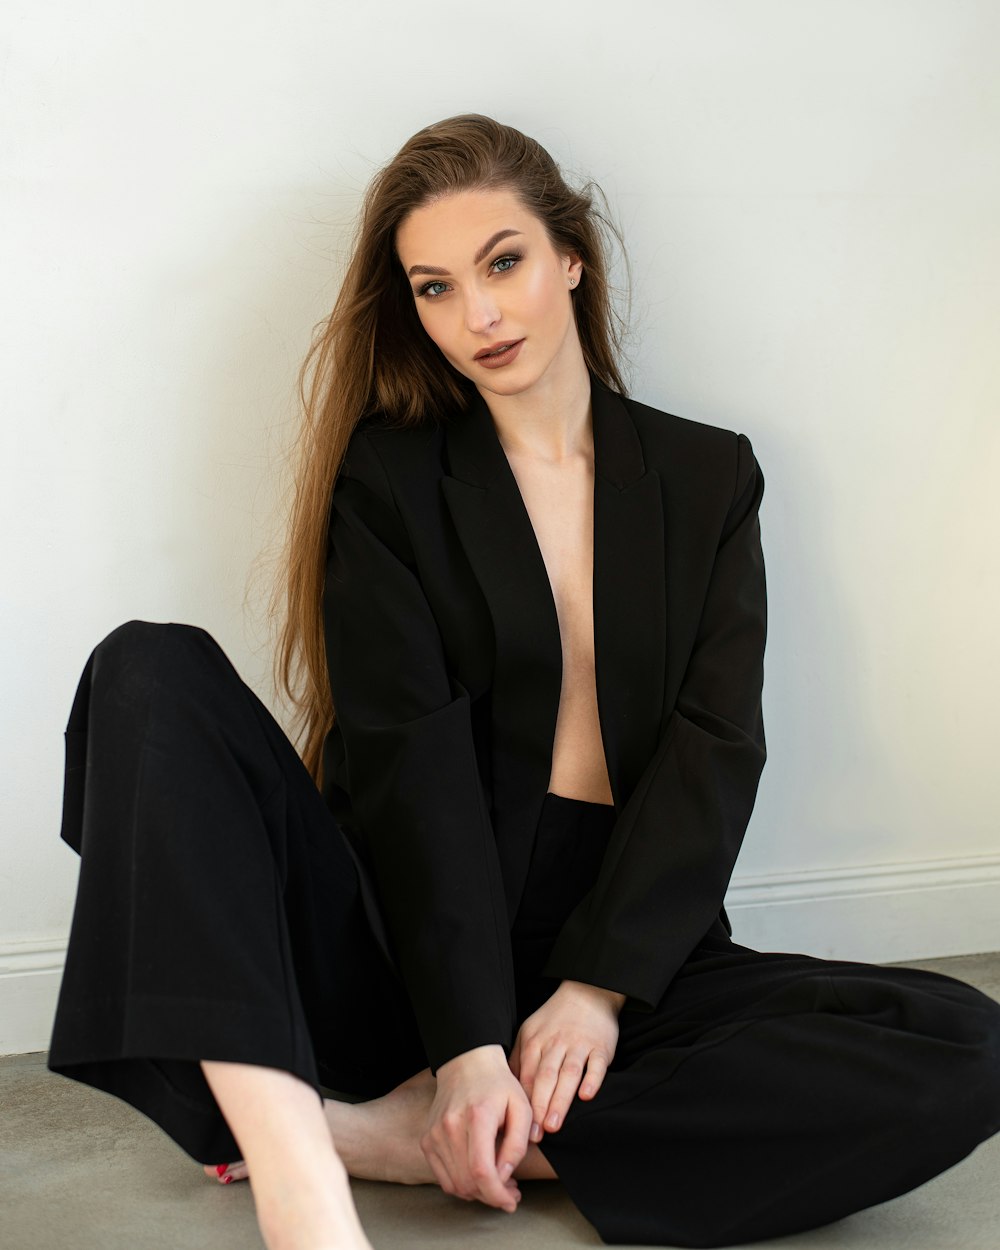 a woman in a black suit sitting on the floor